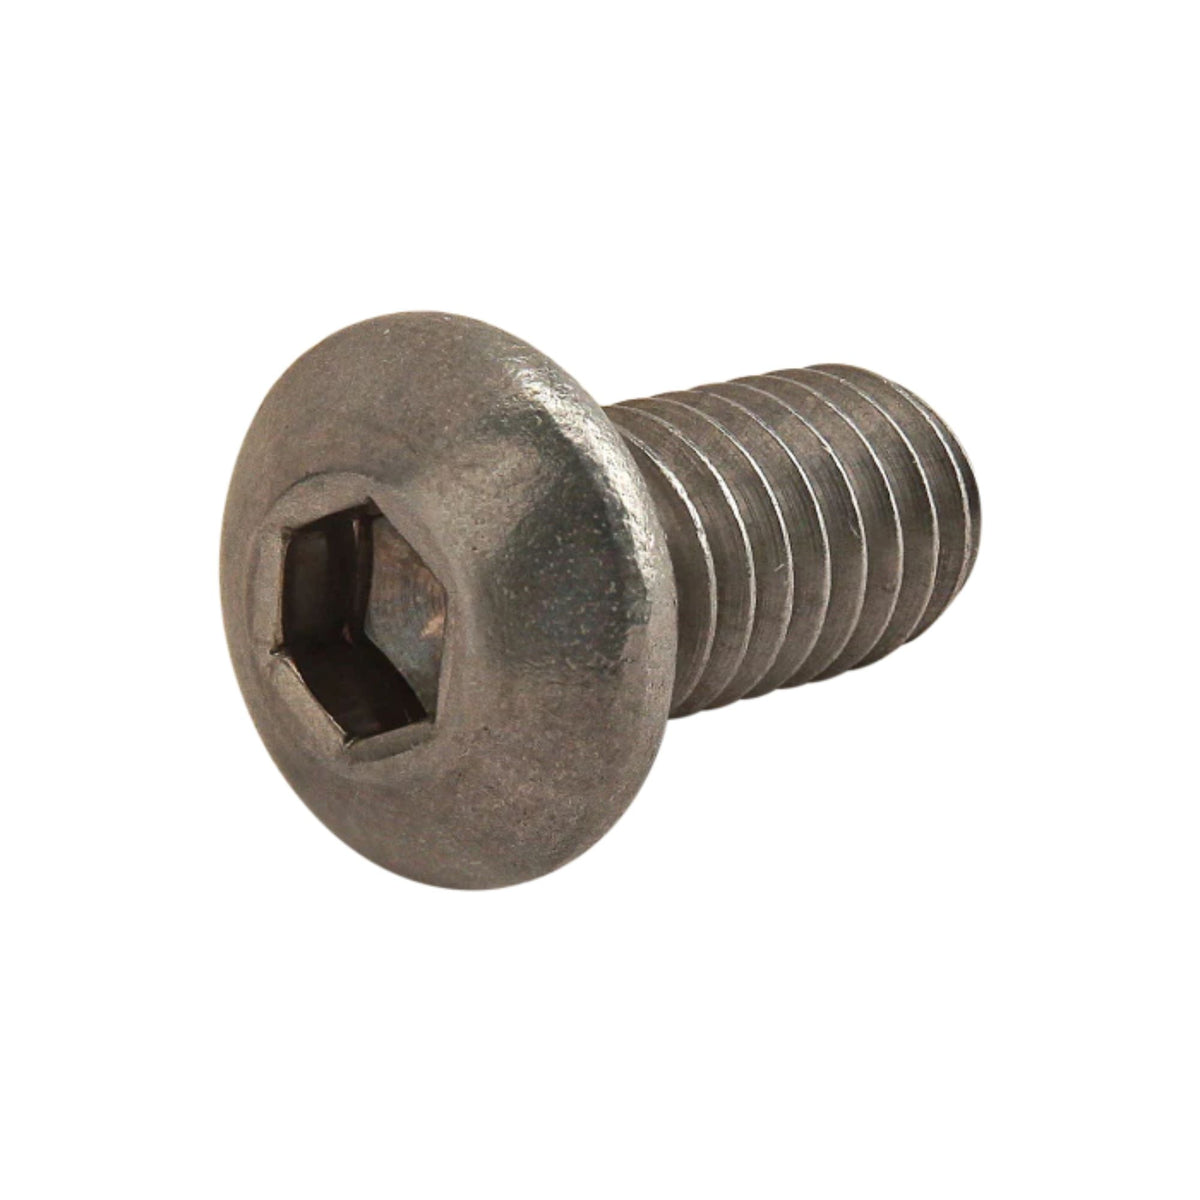 side view of a metal button head screw with the head on the left and the threaded stem pointing toward the right